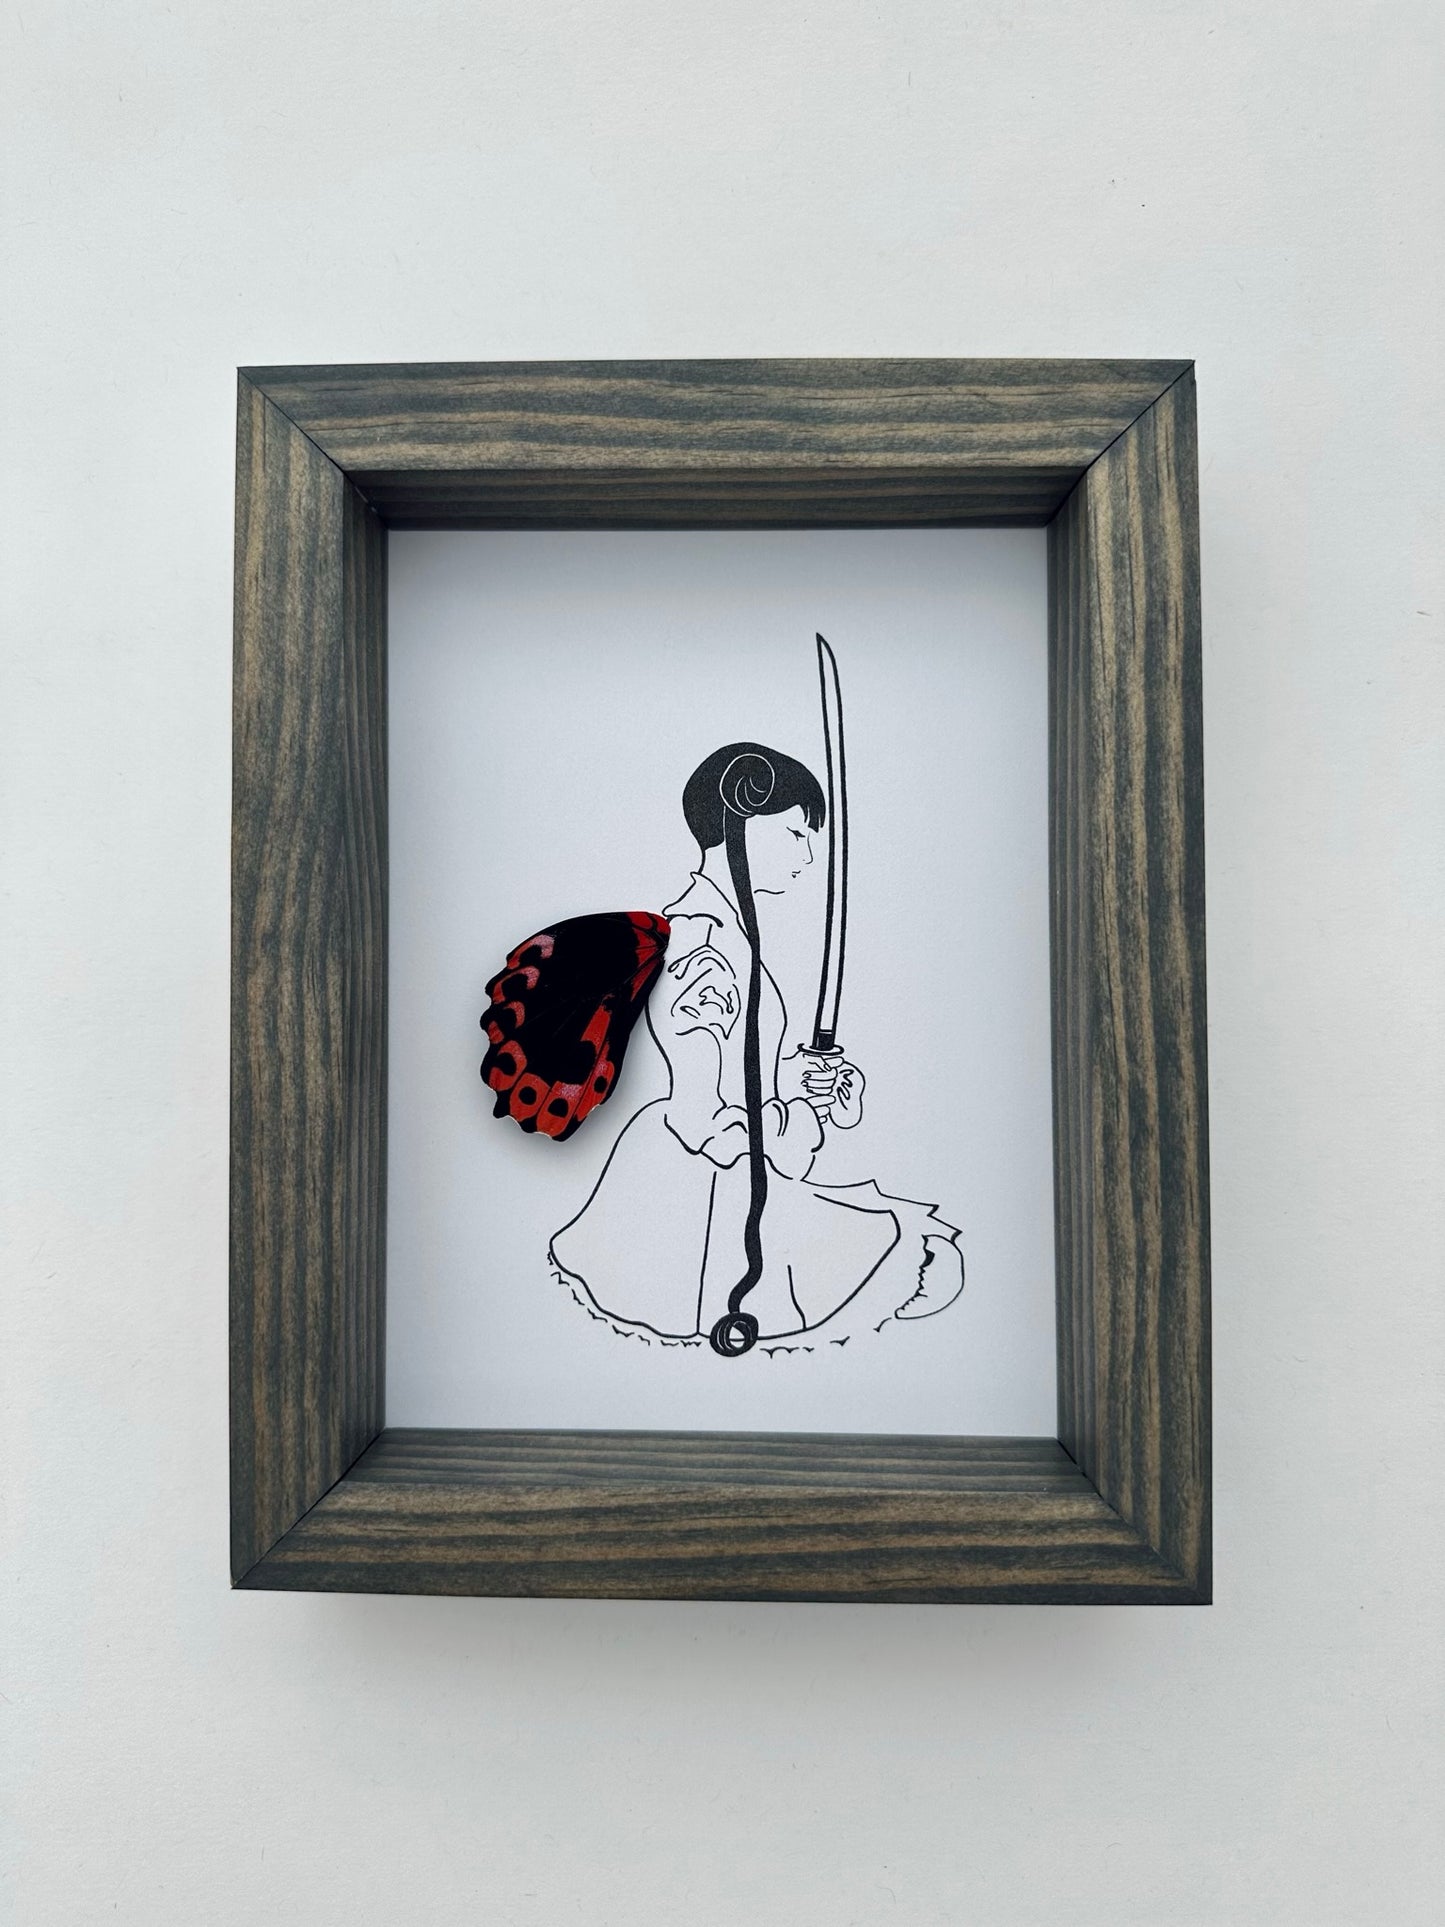 Girl Woman Female with Sword Real Butterfly Wing Framed Art Ethically Sourced Made in MN USA - Holly Ulm - Isms Butterfly Conservation Art